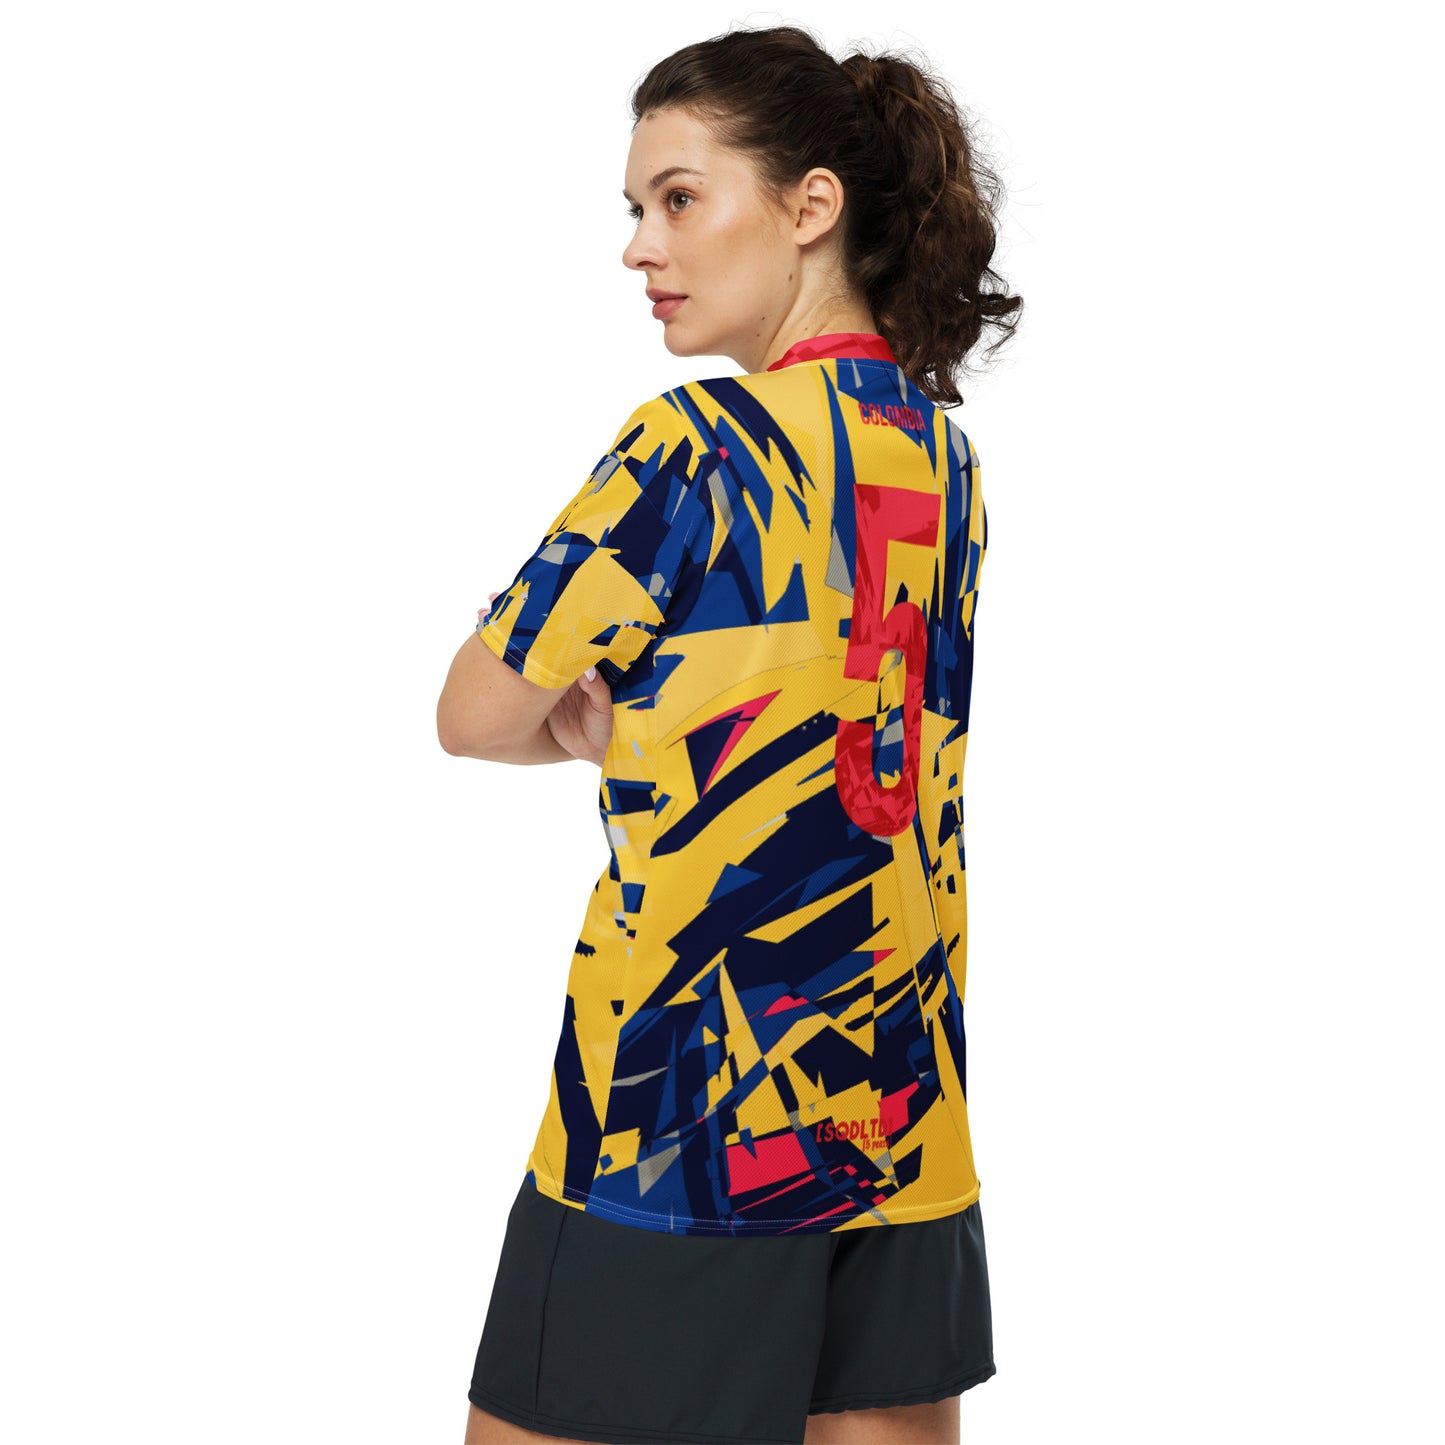 Sqdltd SBWC22 Recycled Unisex Jersey Colombia